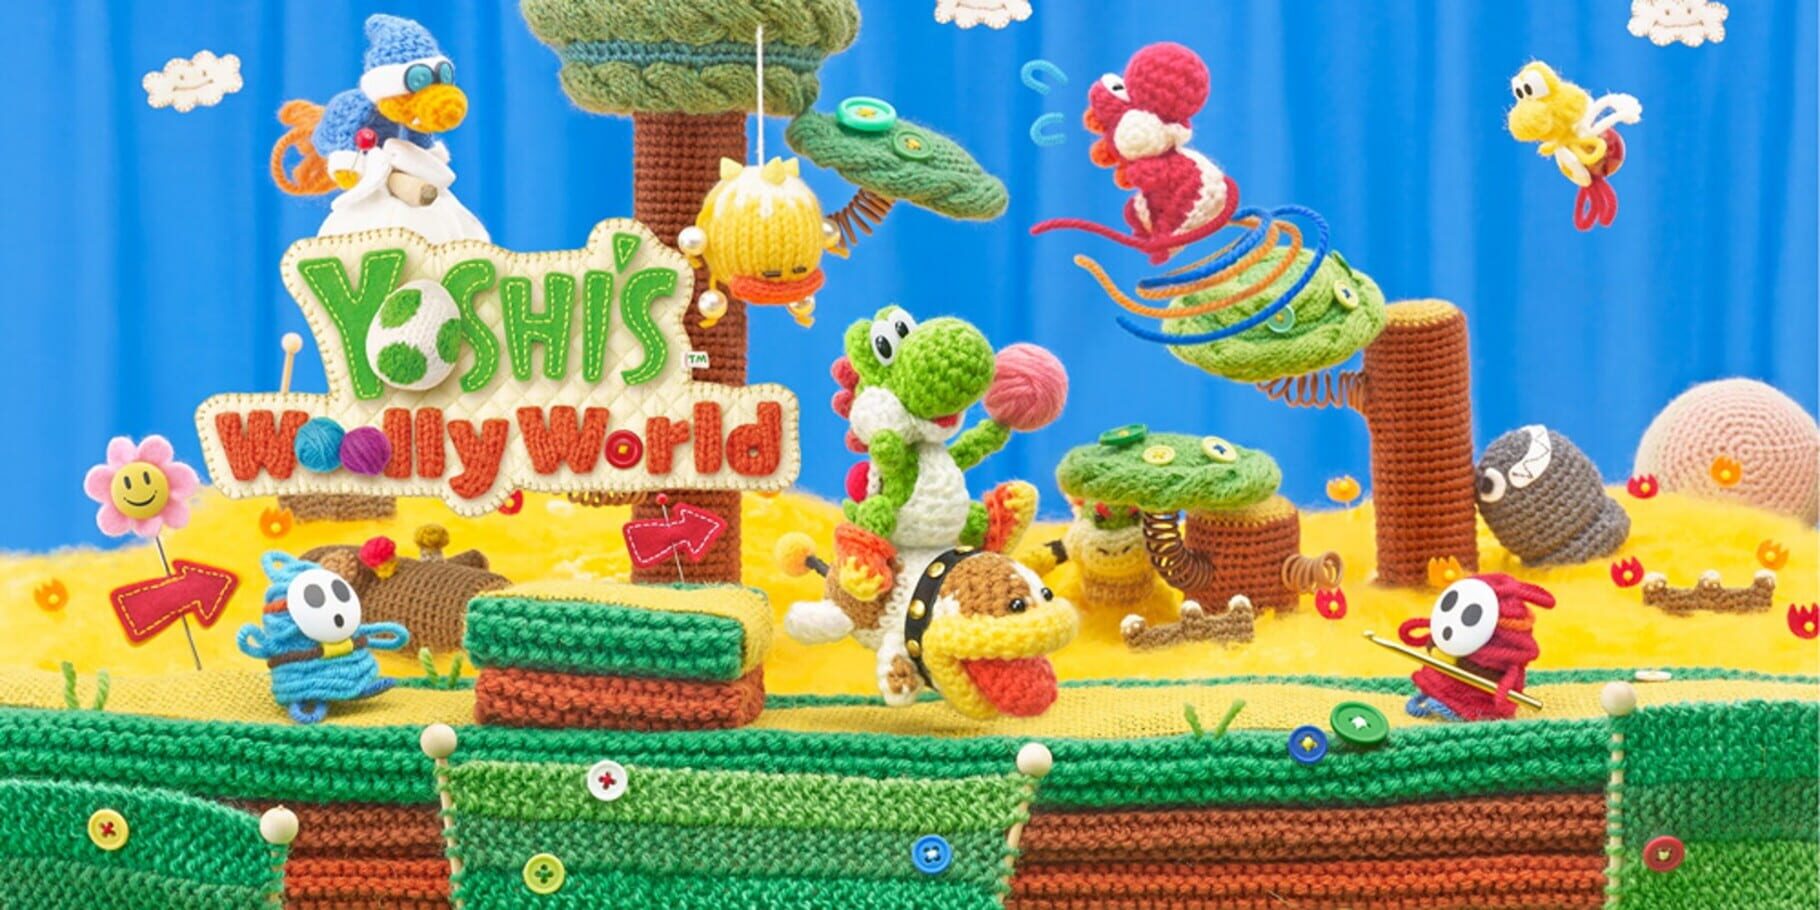 Artwork for Yoshi's Woolly World